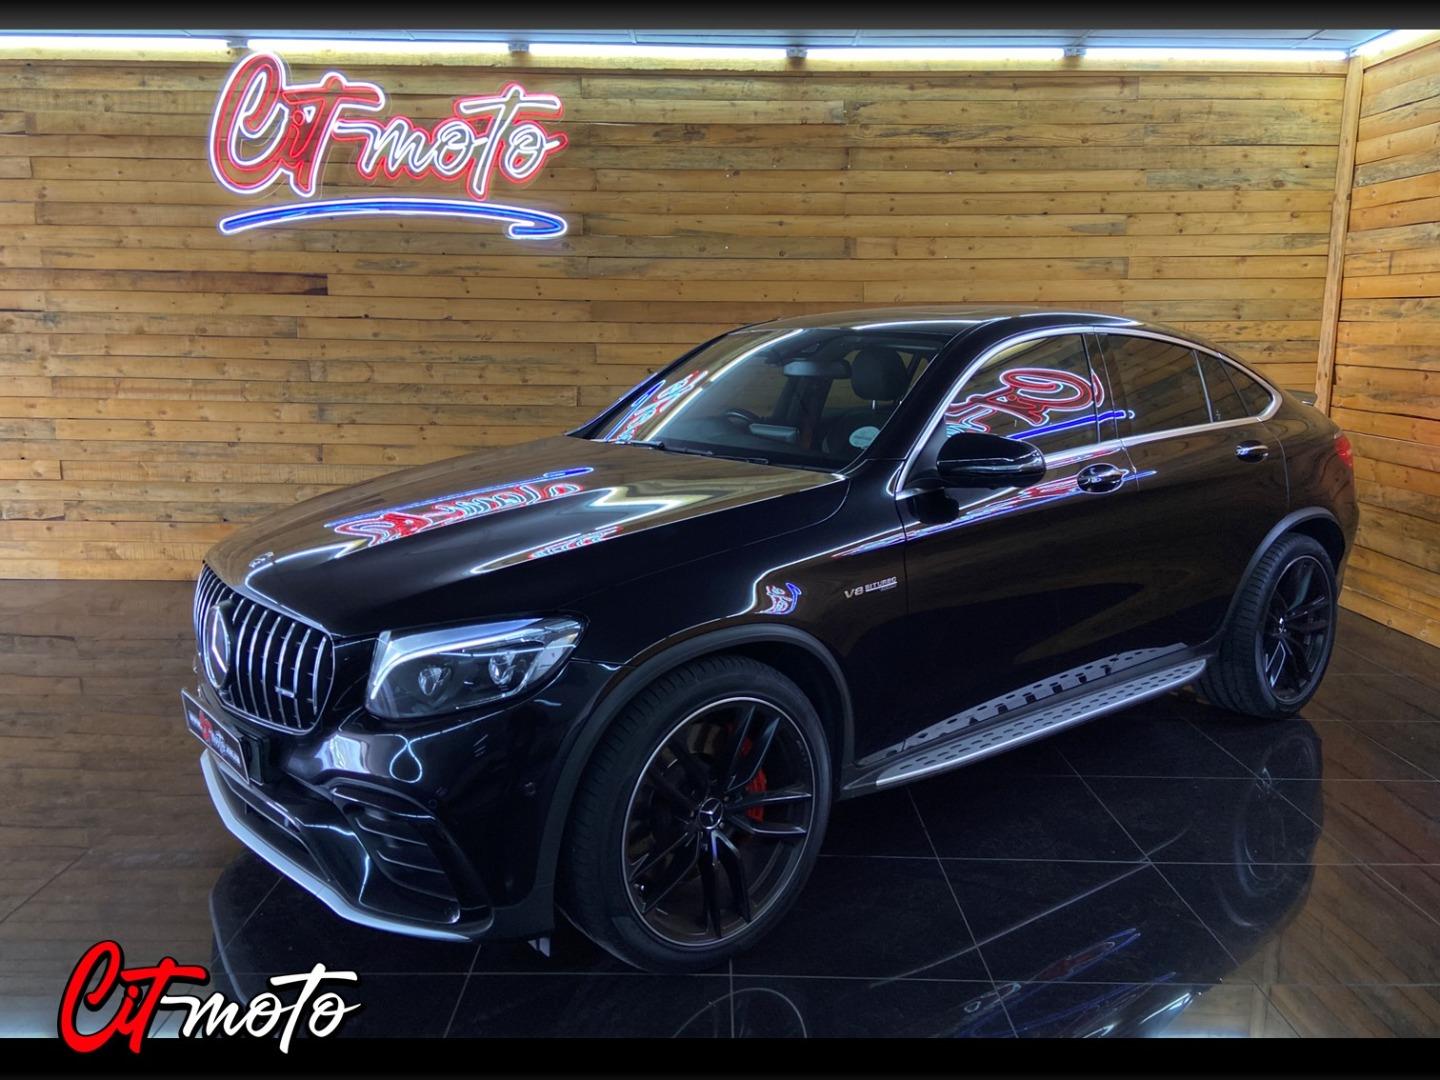 2018 Mercedes-AMG GLC GLC63 S Coupe 4Matic+ For Sale